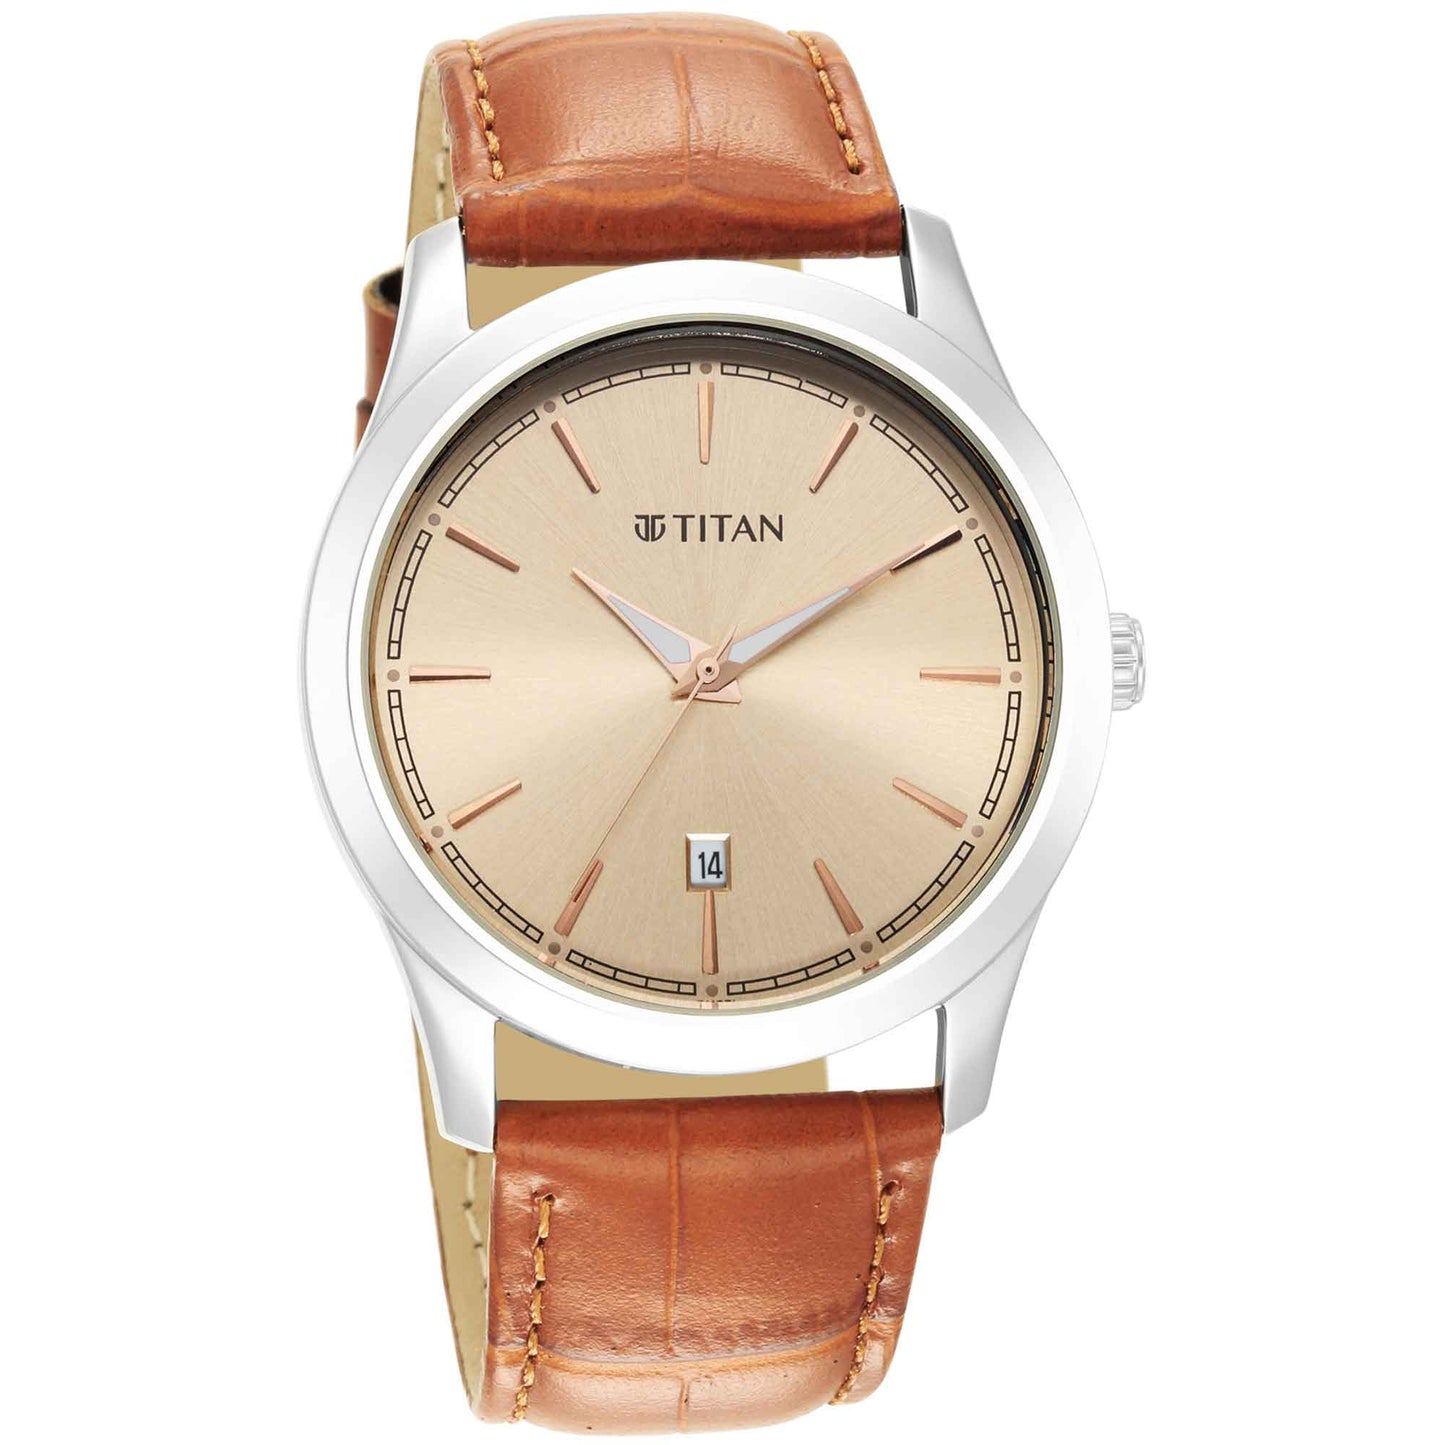 Titan Trendsetters Light Rose Gold Dial Analog Leather Strap watch for Men